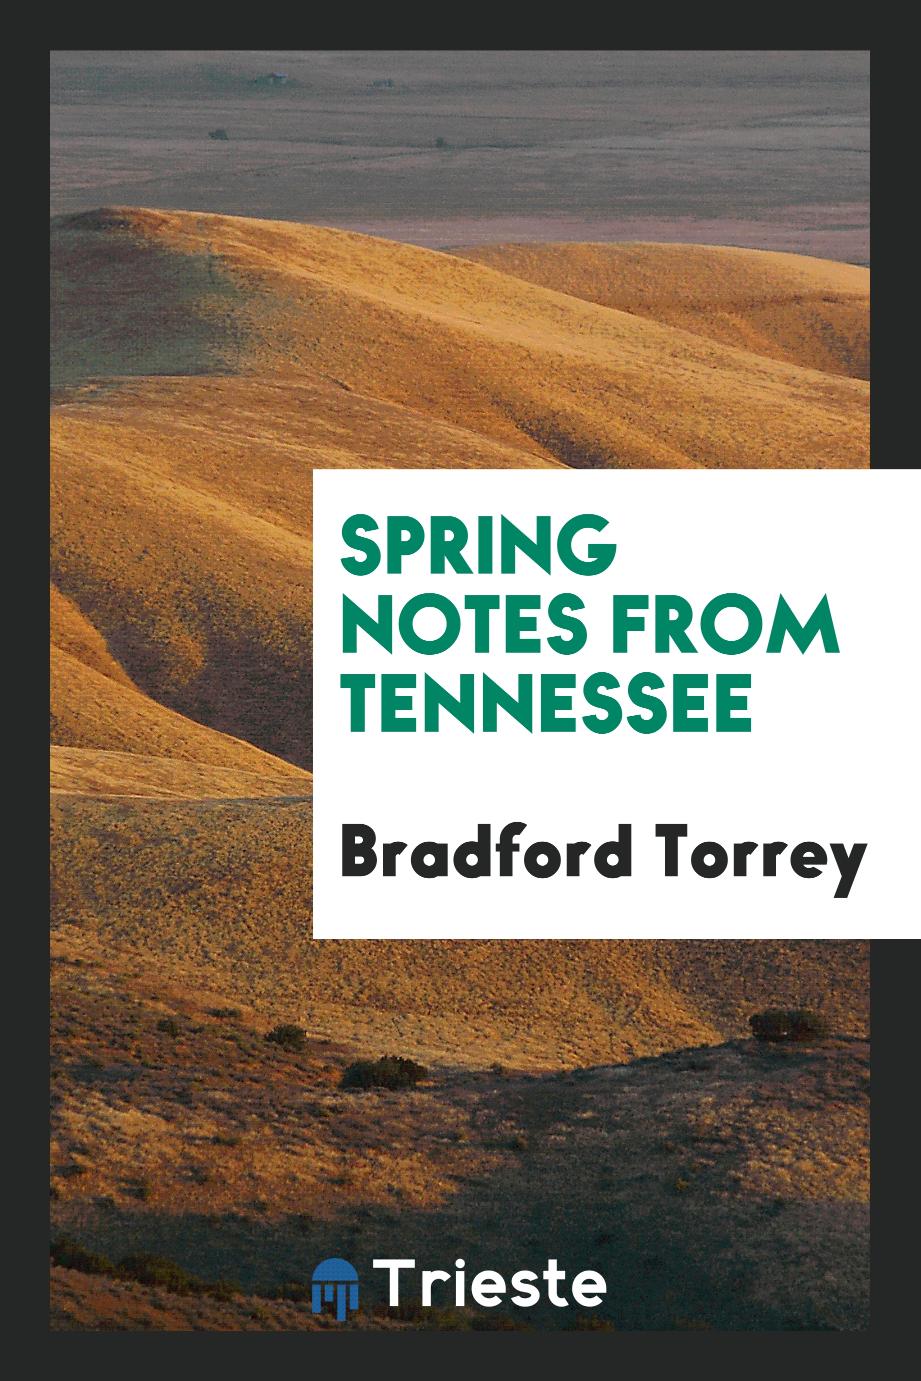 Spring notes from Tennessee